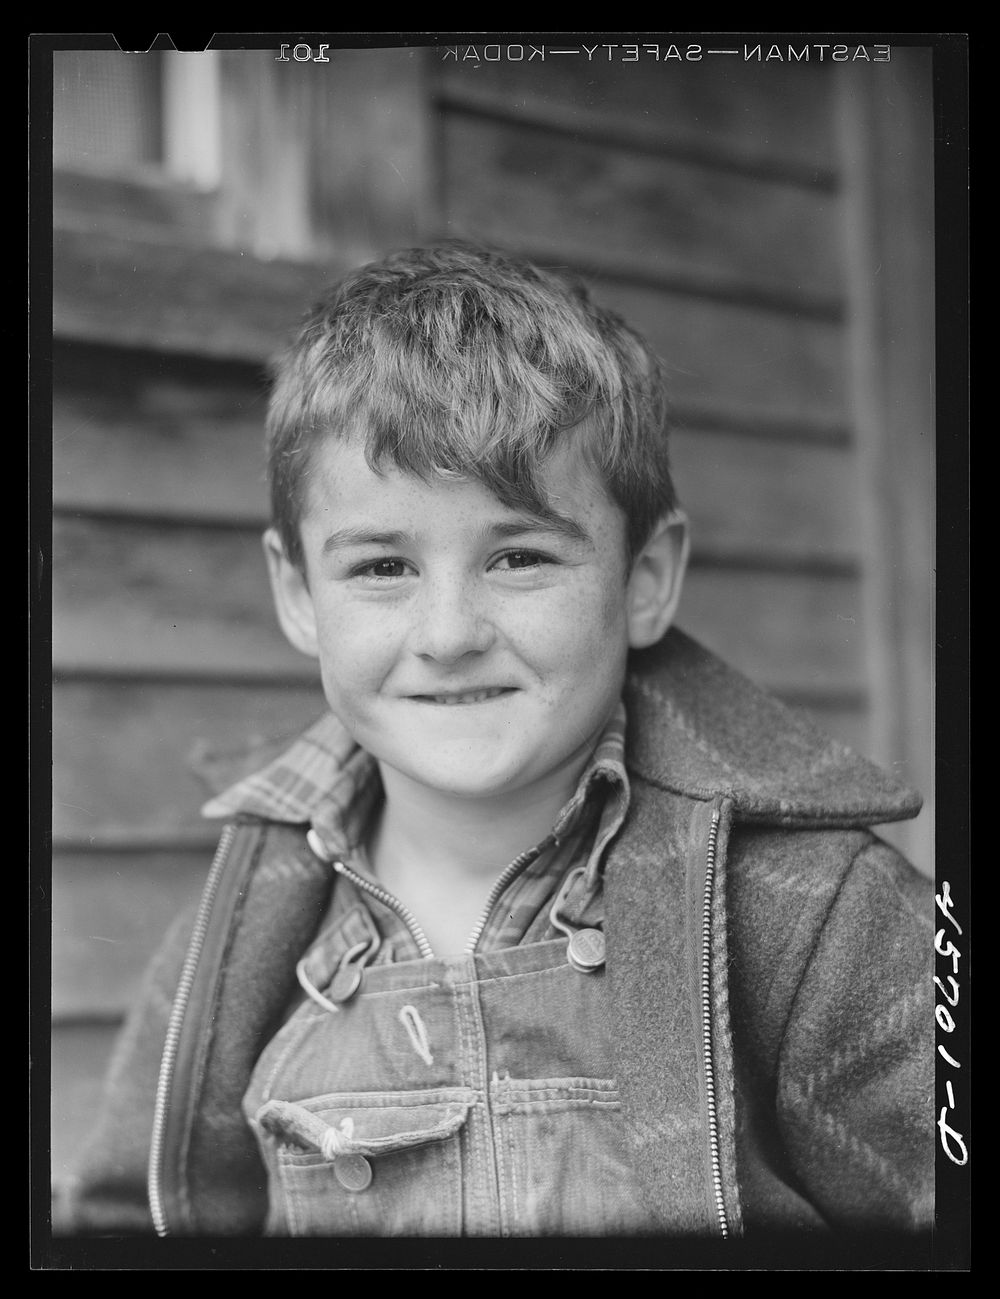 Bobby Gaynor, who lives with his family on a farm near Fairfield, Vermont. Sourced from the Library of Congress.